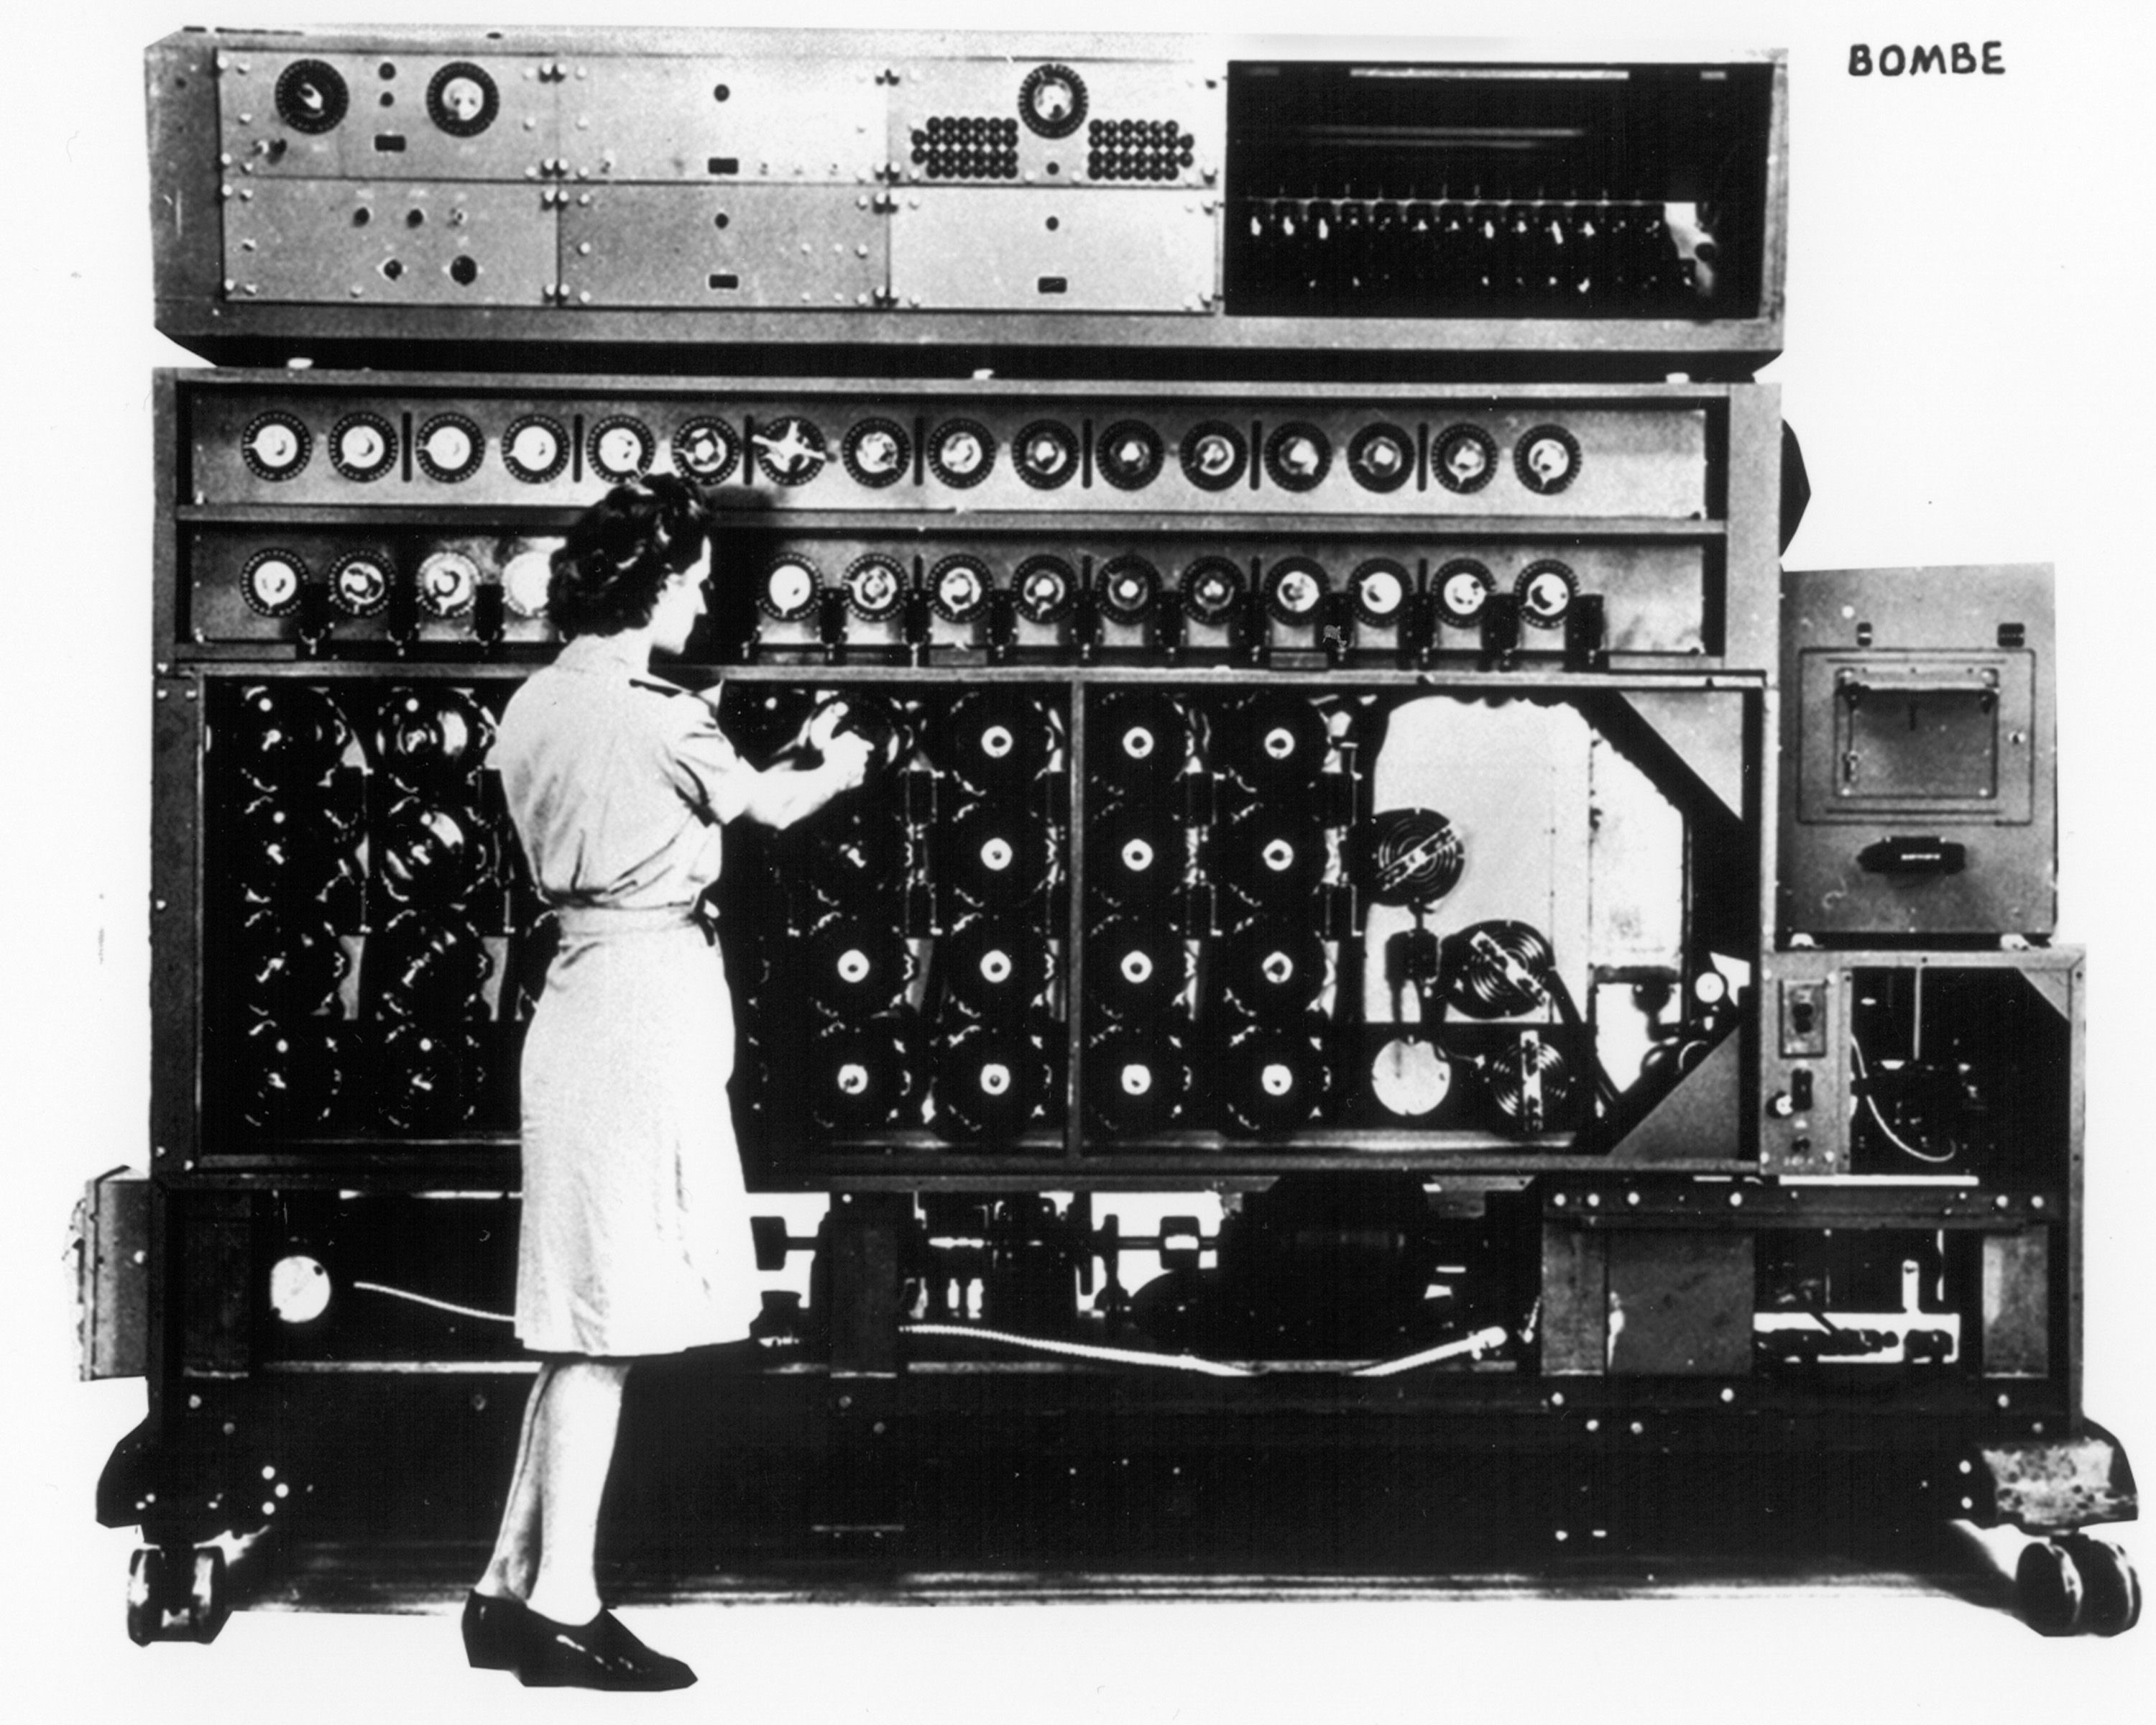 The American Enigma decryption machine, The Bombe Computer, in use during WWII